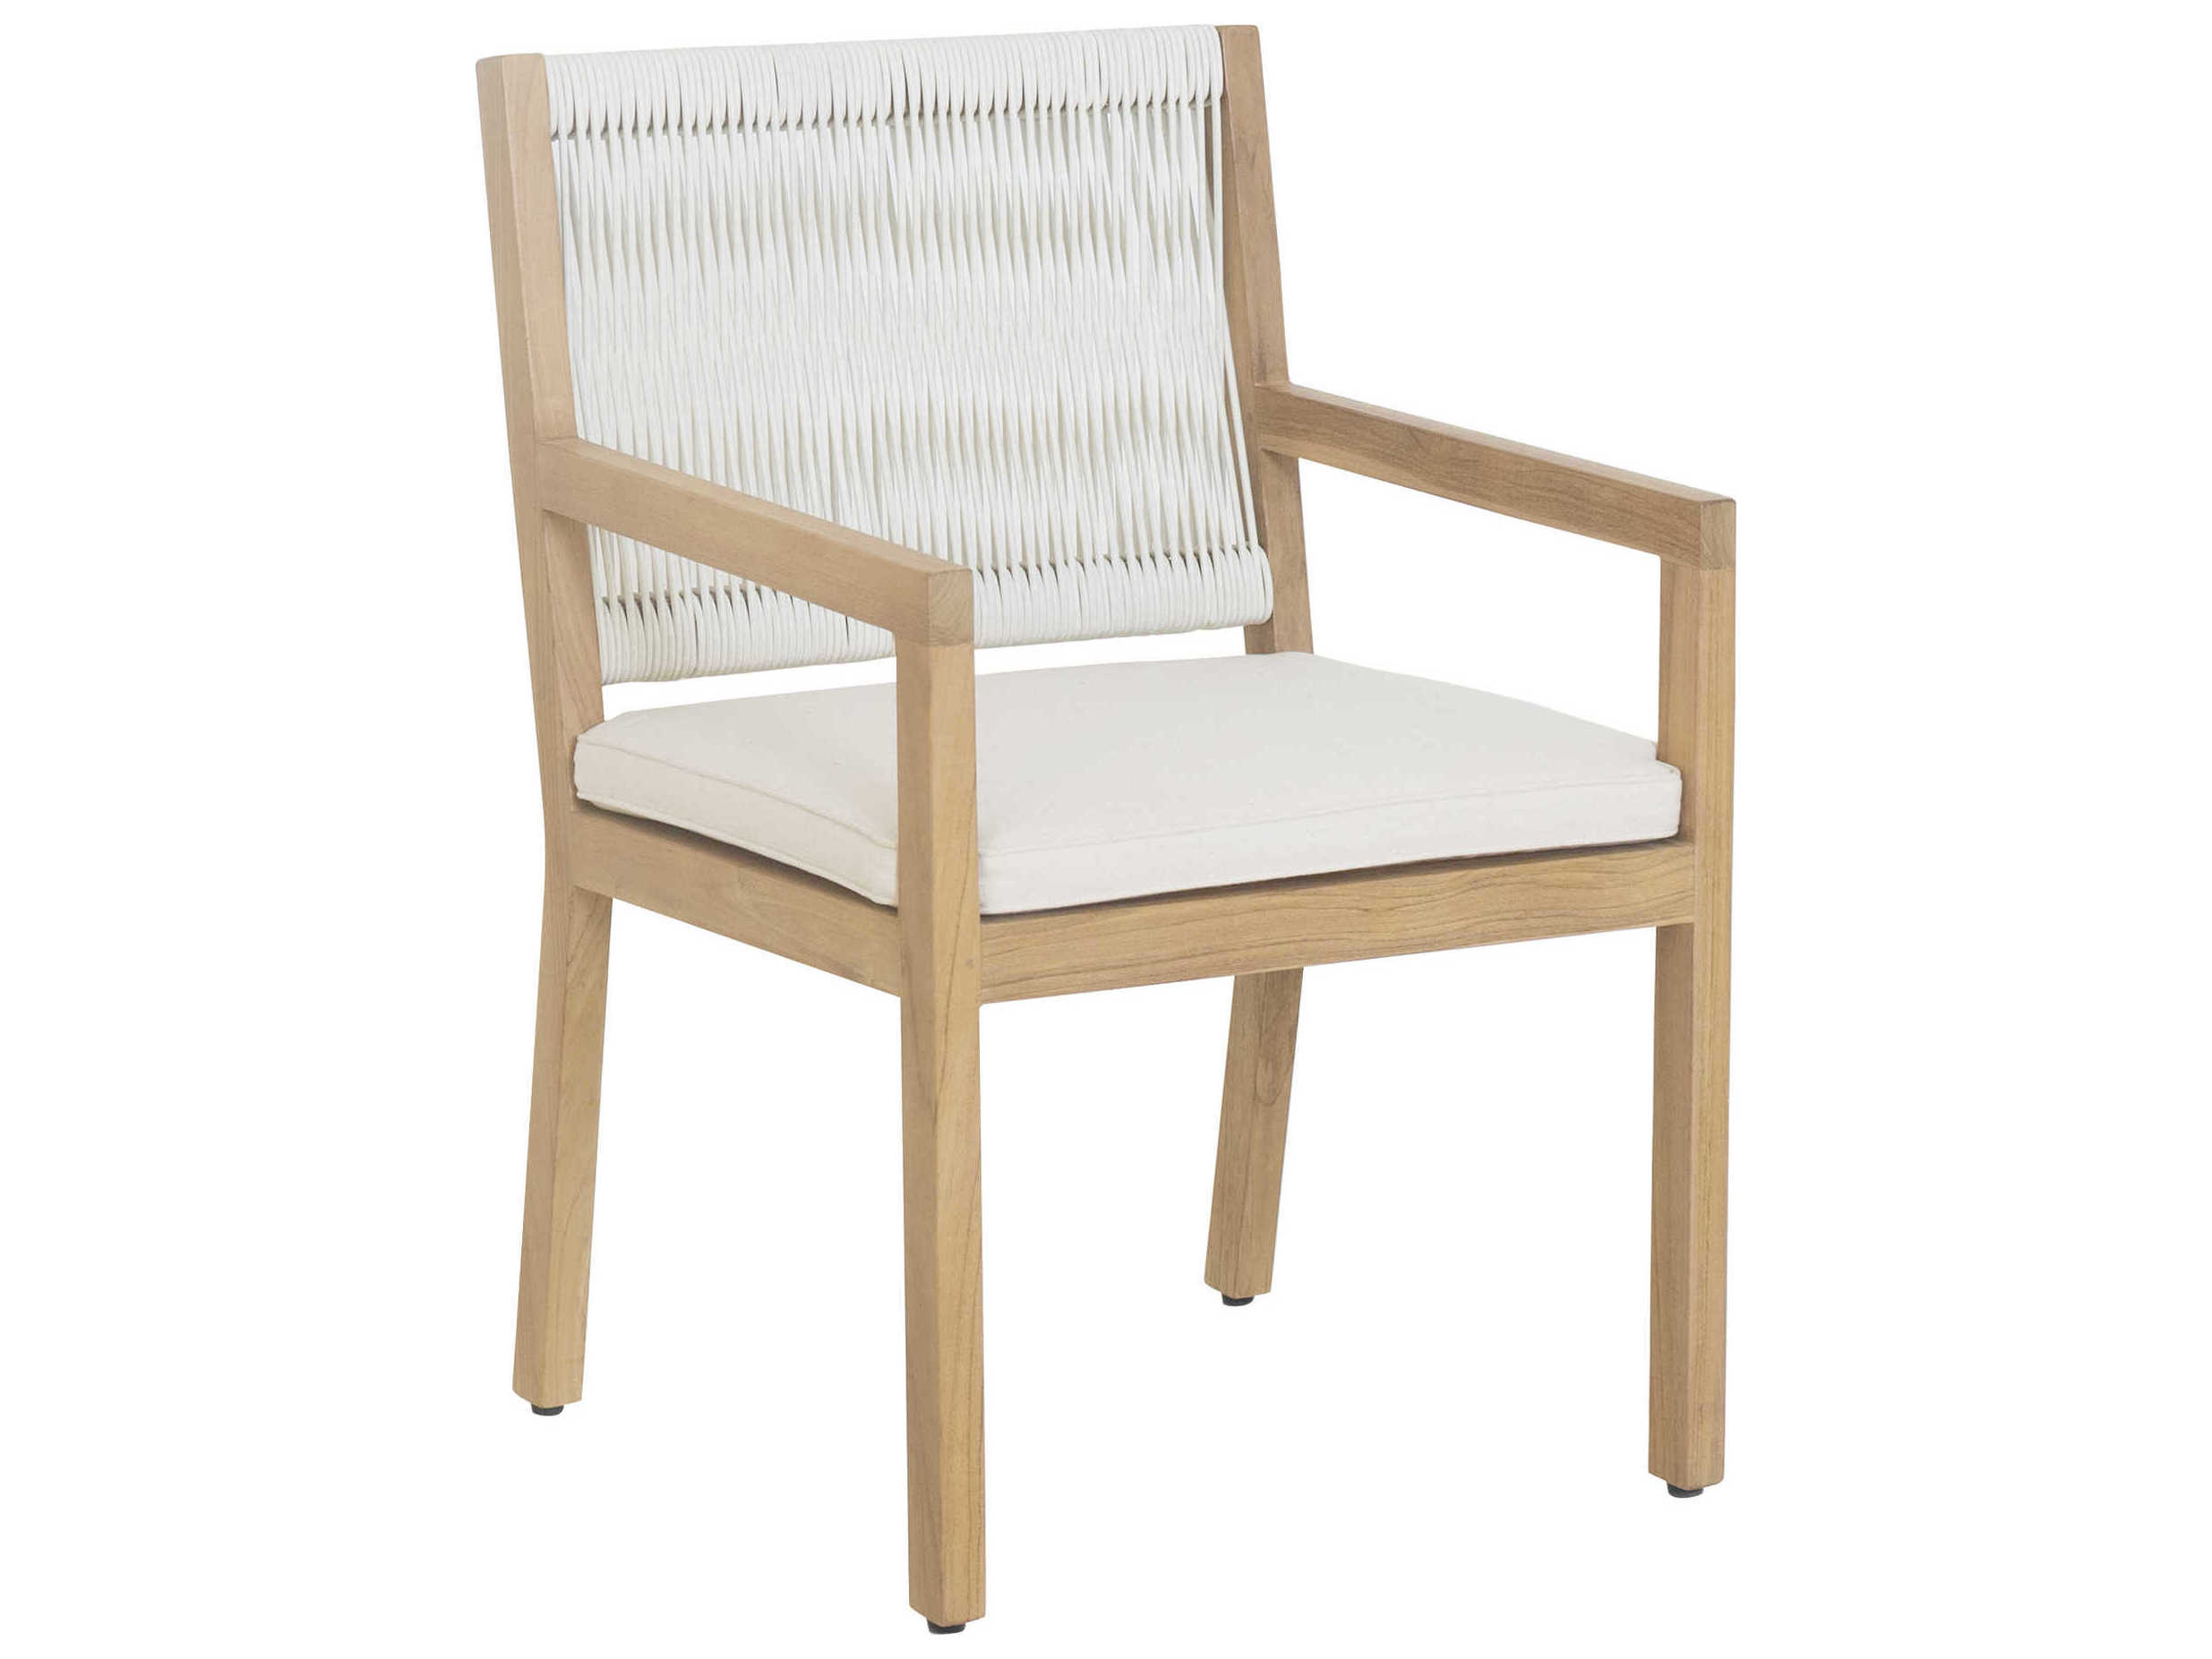 Southerland Teak Wood Chair with Cushion